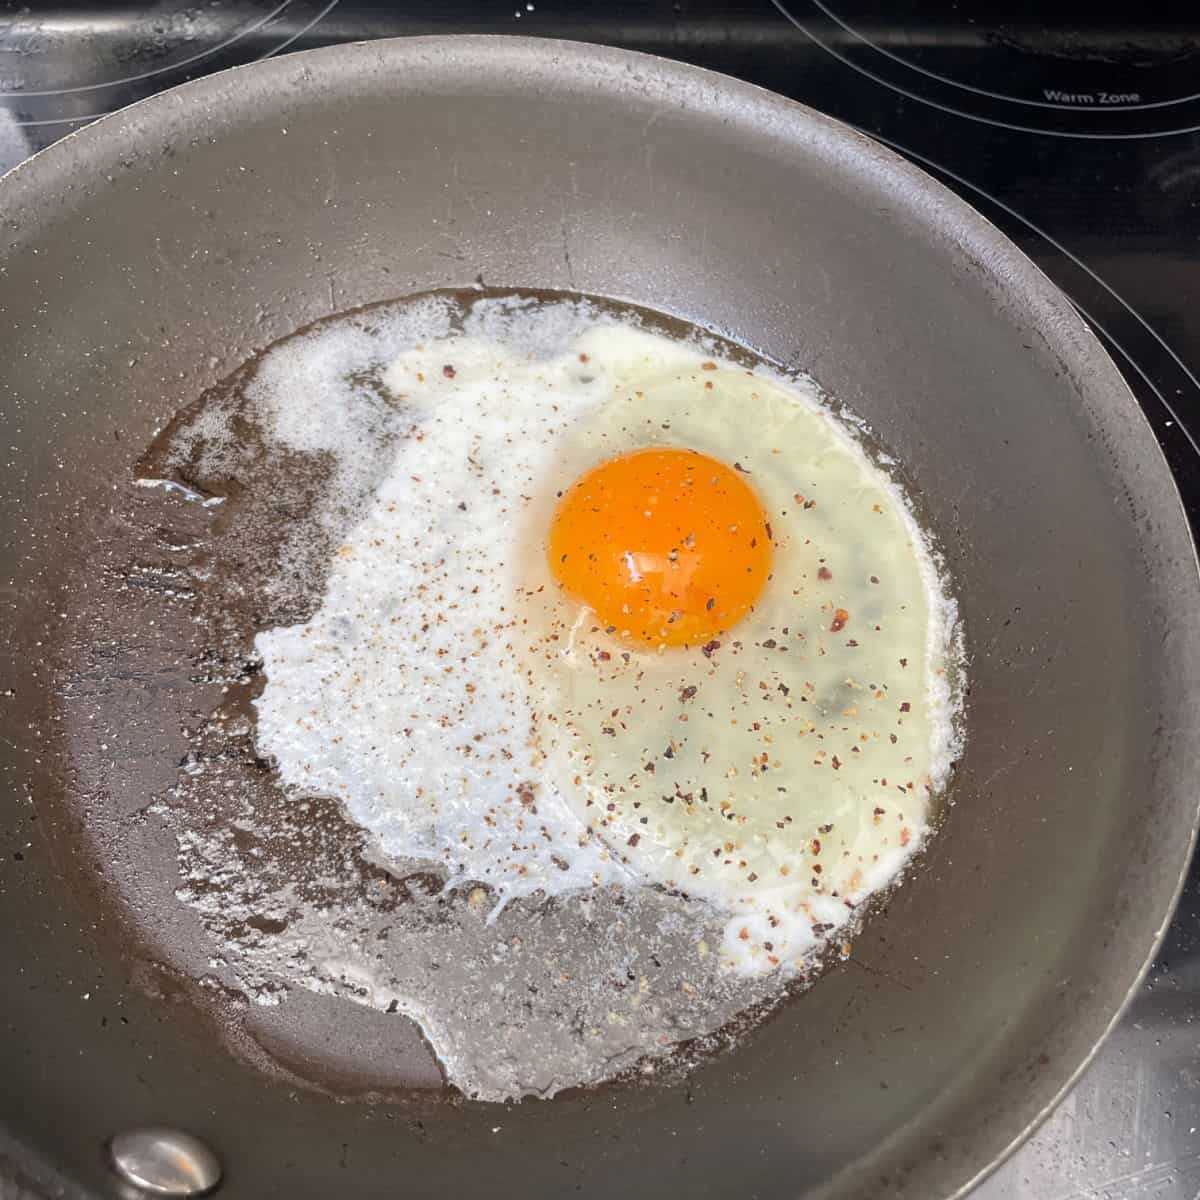 A perfectly cooked fried egg.